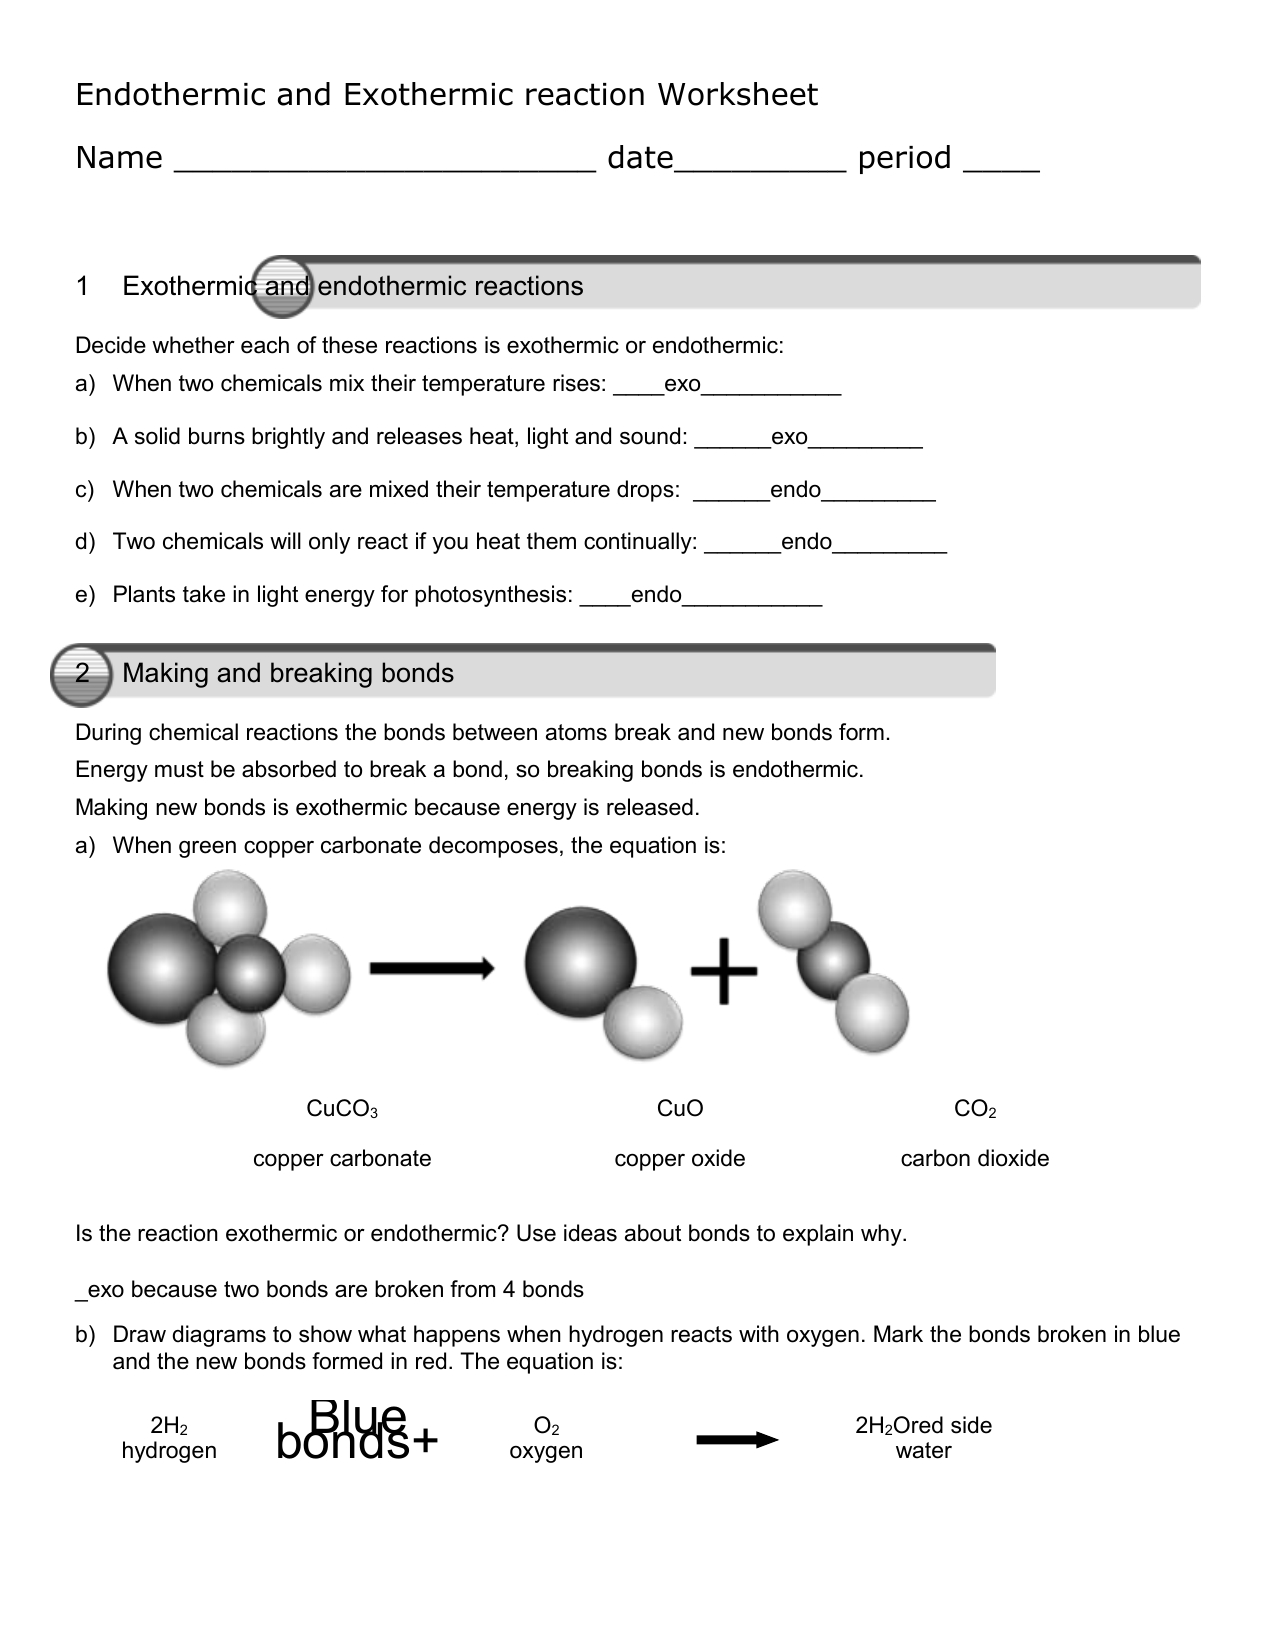 Reactions In Endothermic And Exothermic Reaction Worksheet Answers